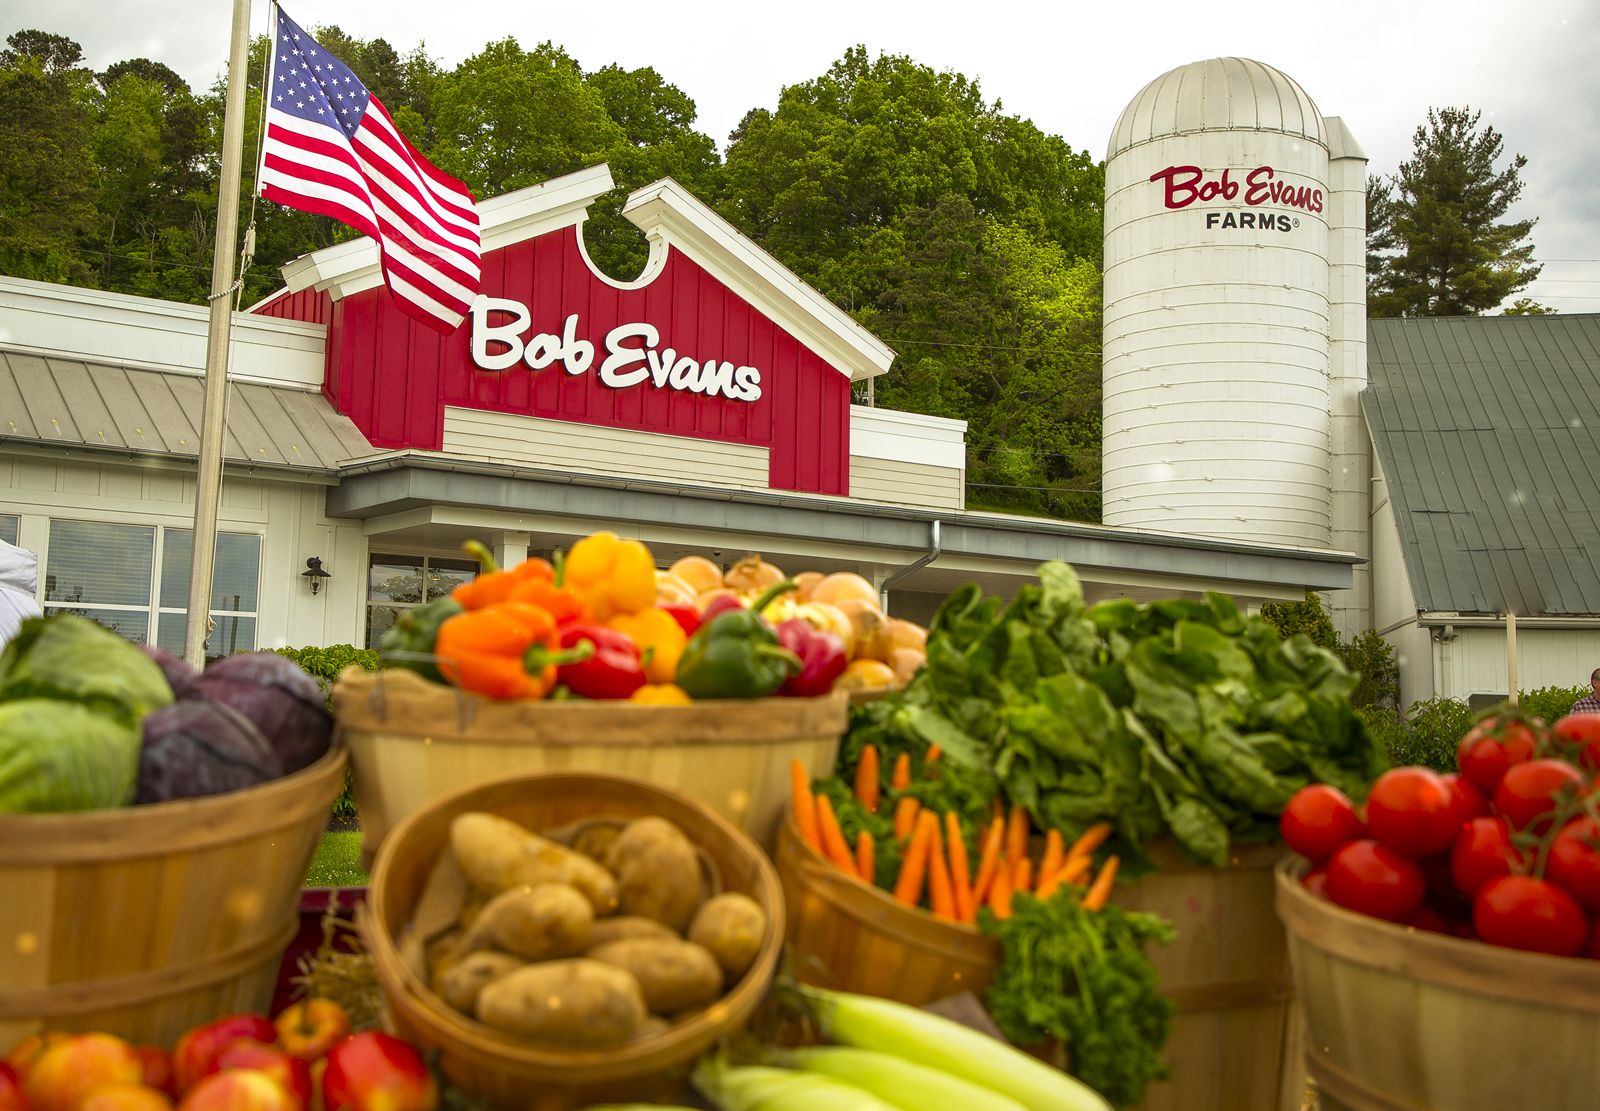 Bob Evans Restaurants Returns with Second Annual Fundraiser Supporting Future Generation of American Farmers